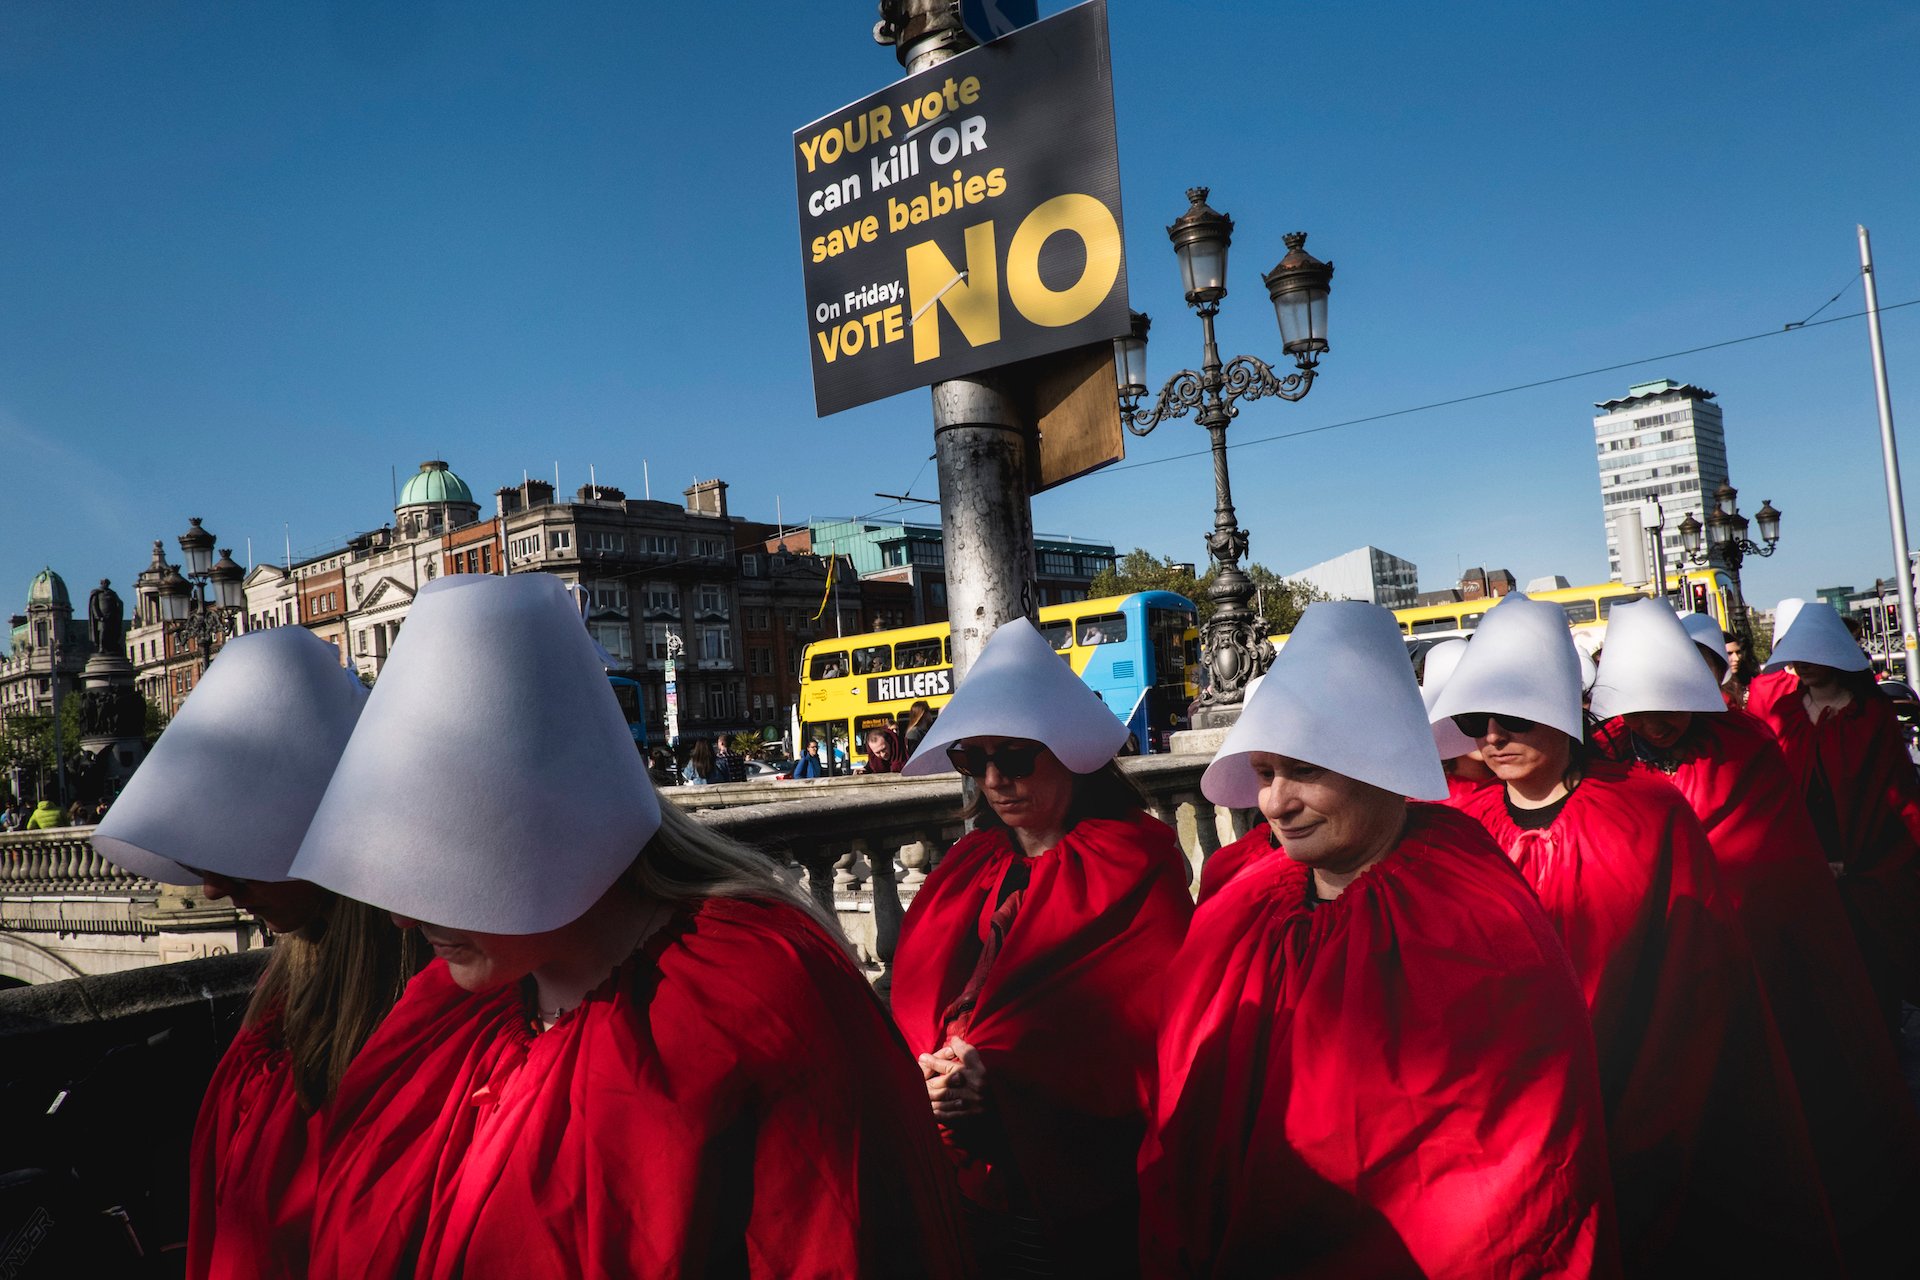 Two days before the referendum on abortion in Ireland, a feminist group named Rosa organised an artistic performance: about 40 women in Dublin dressed as characters from The Handmaid’s Tale to raise awareness on reproductive rights.